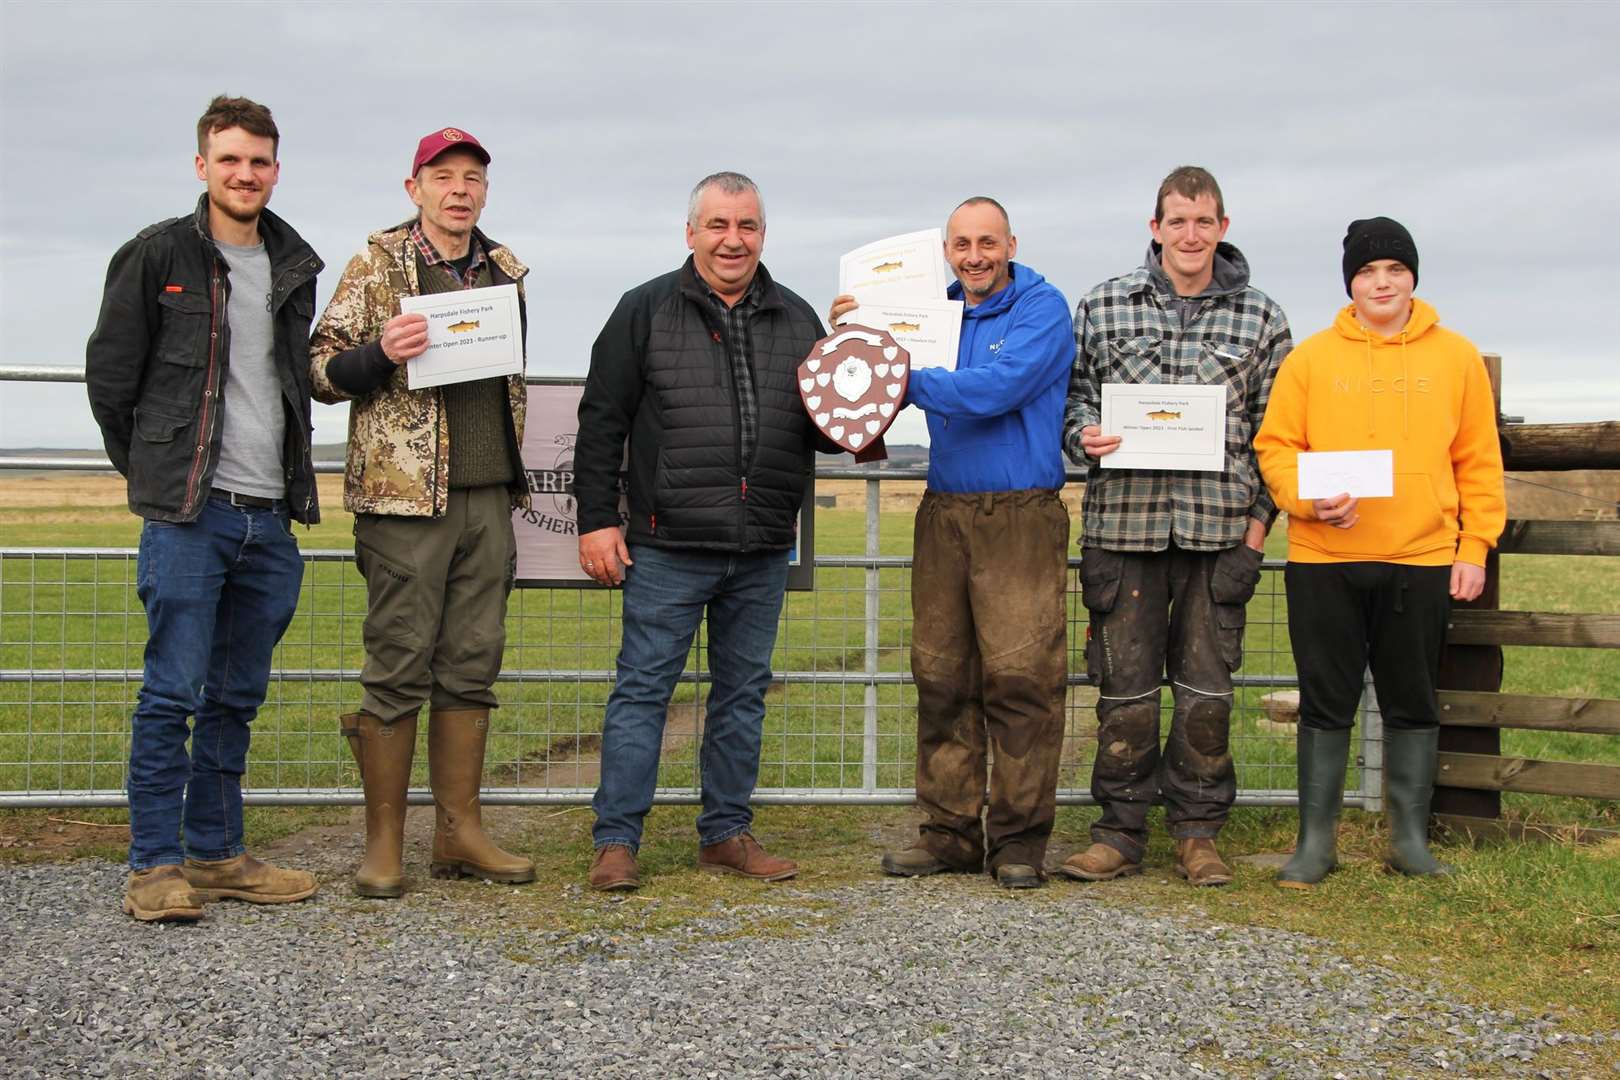 From left: Gavin Munro (sponsor), Toby Bracey, Martin Munro (sponsor), Kevin Imlach, Ronnie Bain and Kian Lamb after the Winter Open.